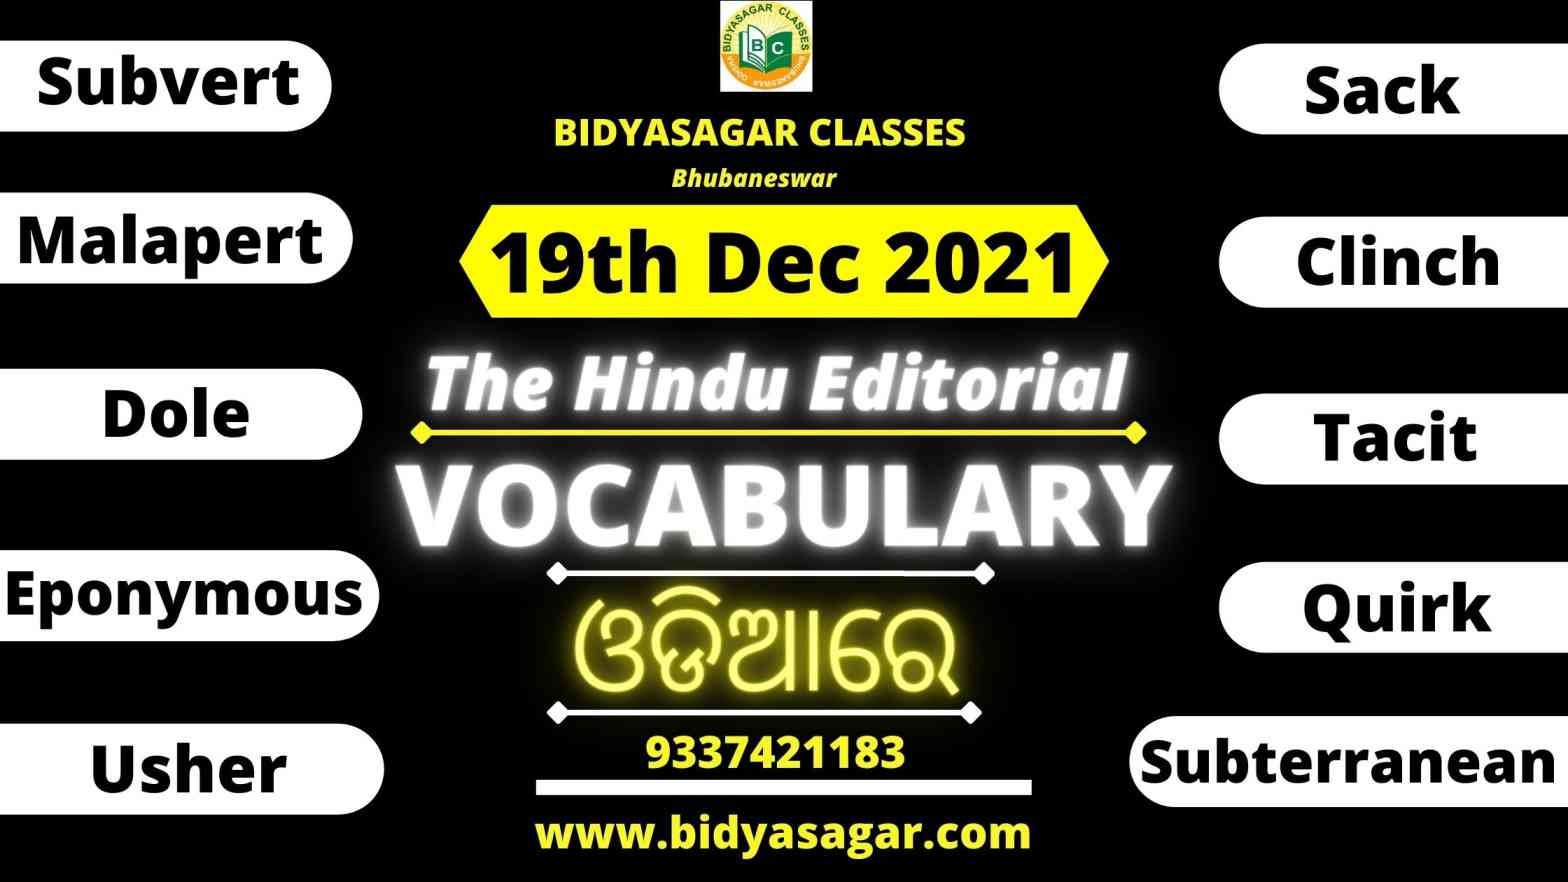 The Hindu Editorial Vocabulary of 19th December 2021